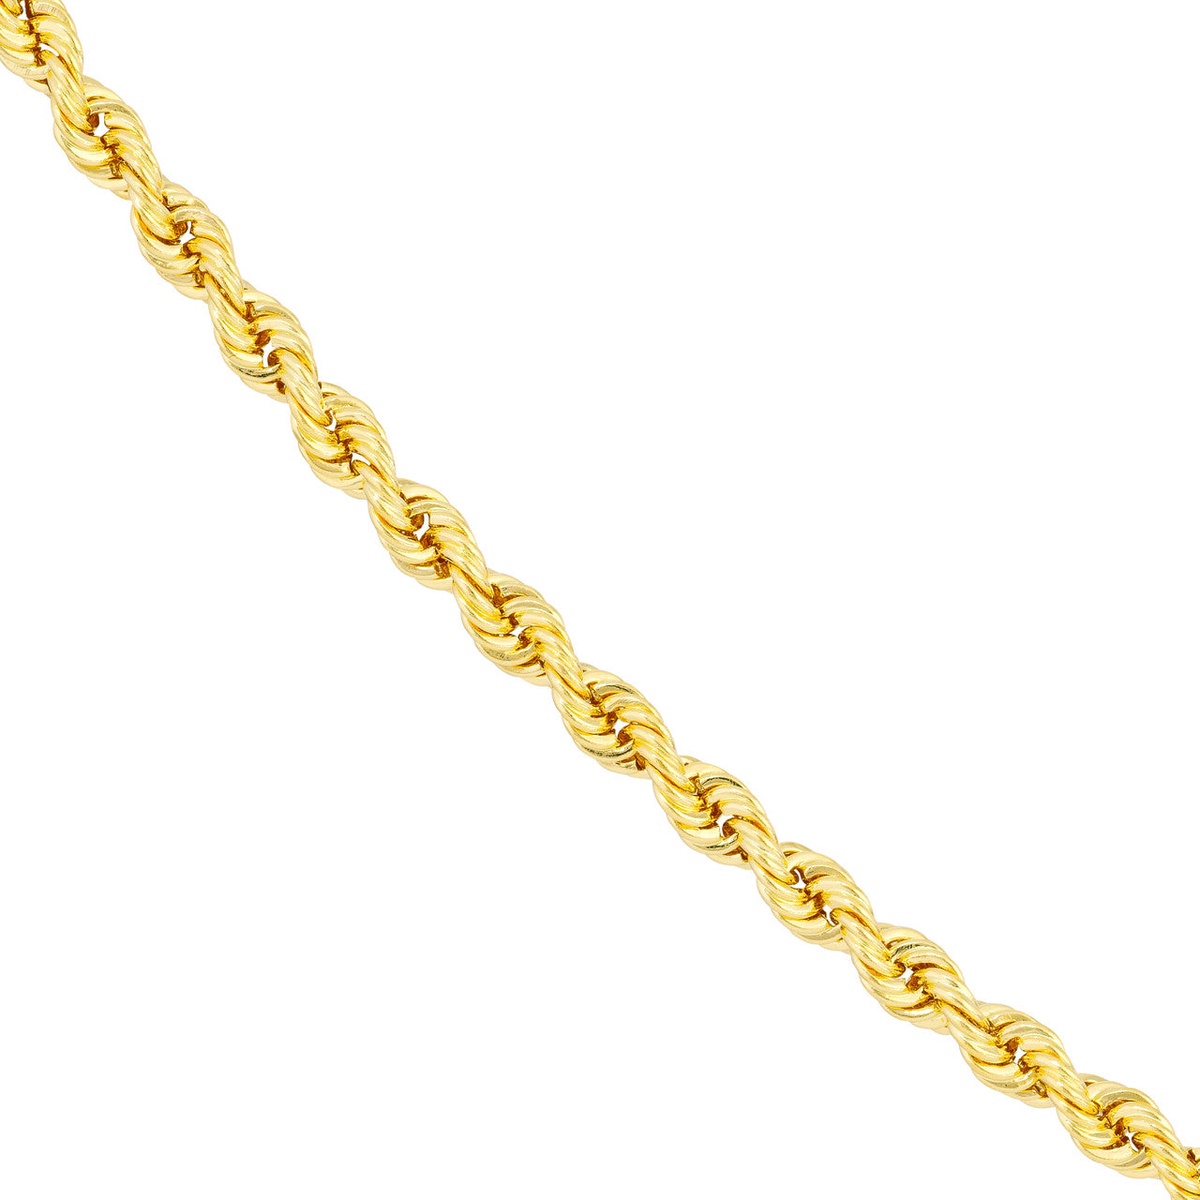 How to Rock Gold Chains for Men with Confidence